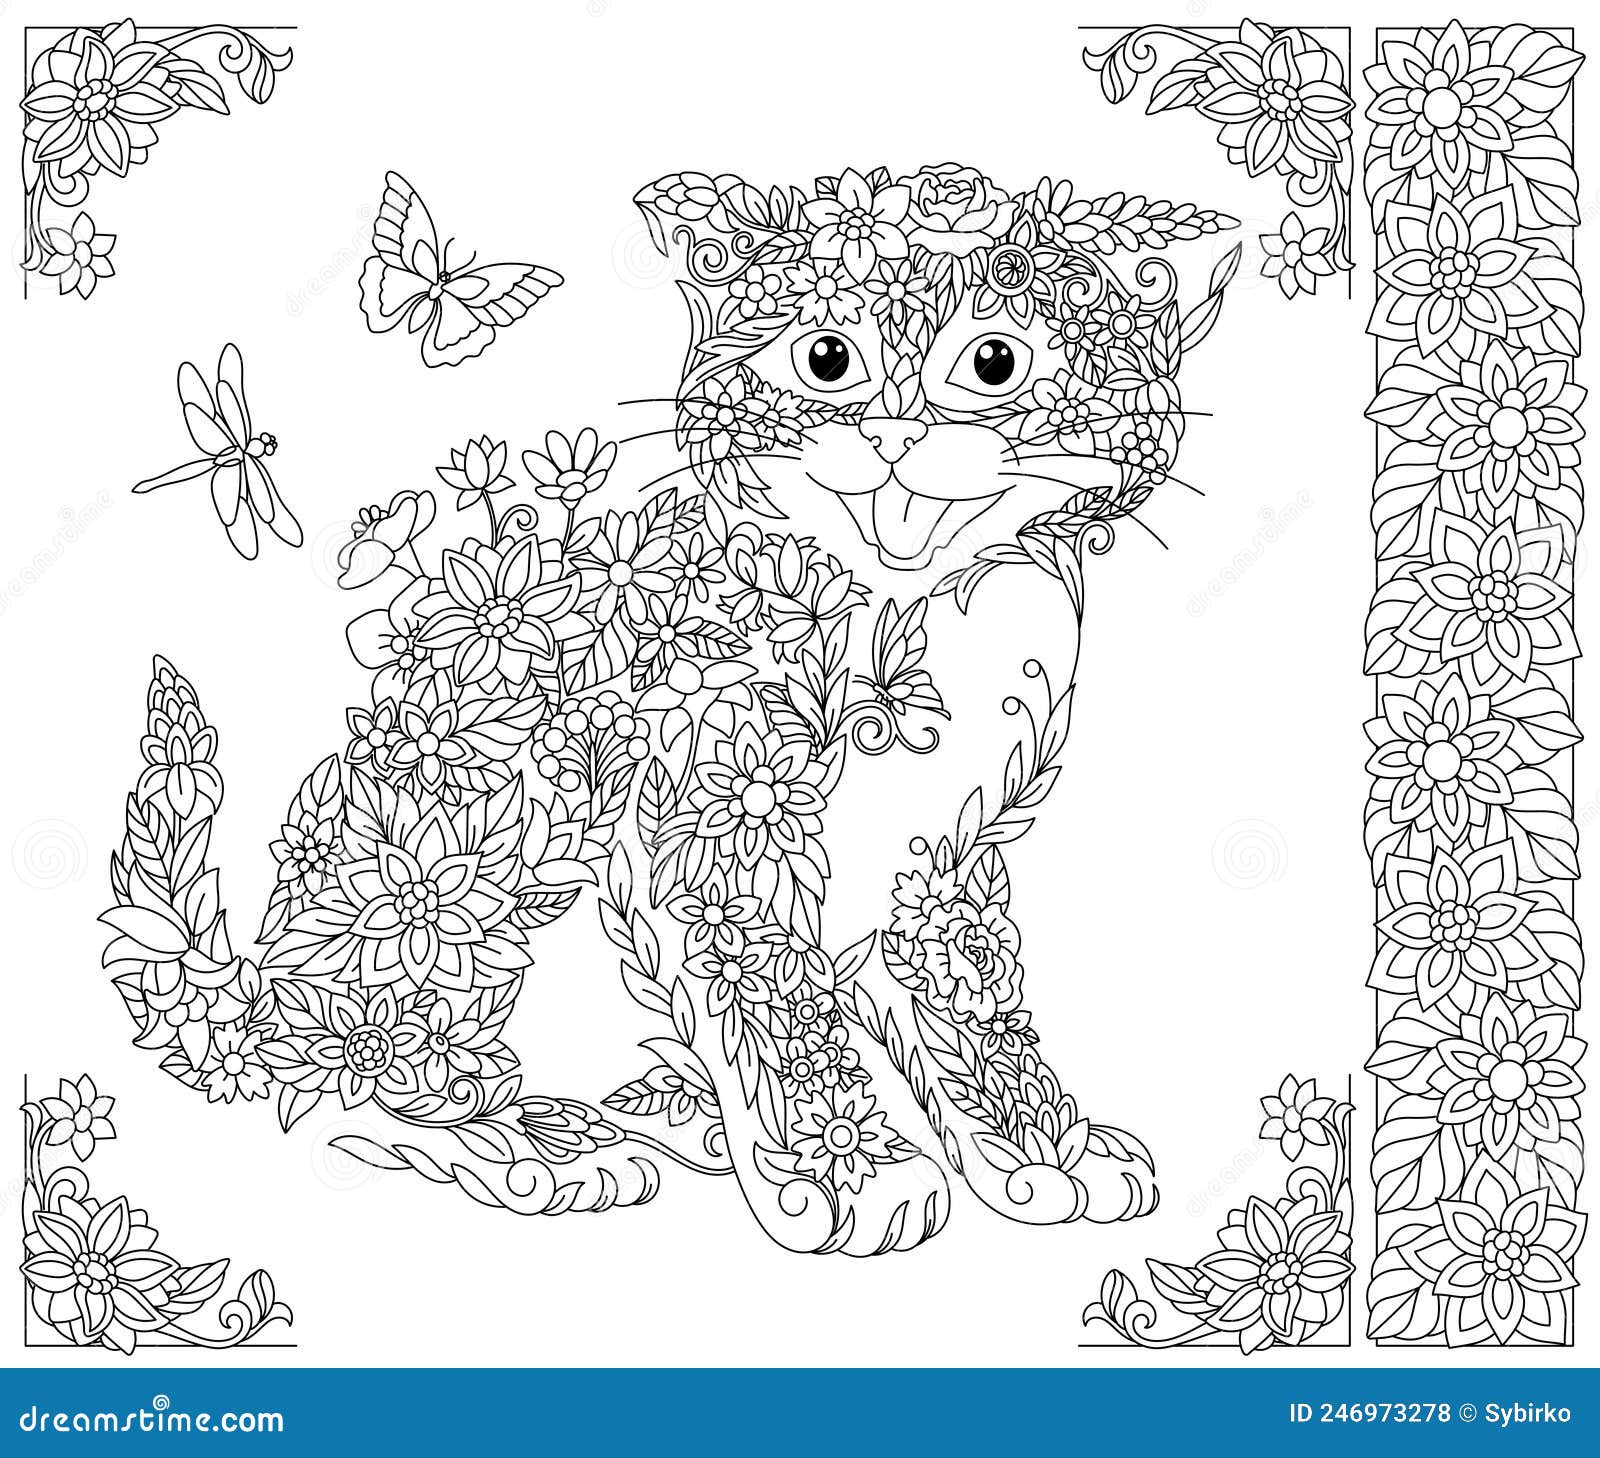 Floral kitten coloring book page stock vector